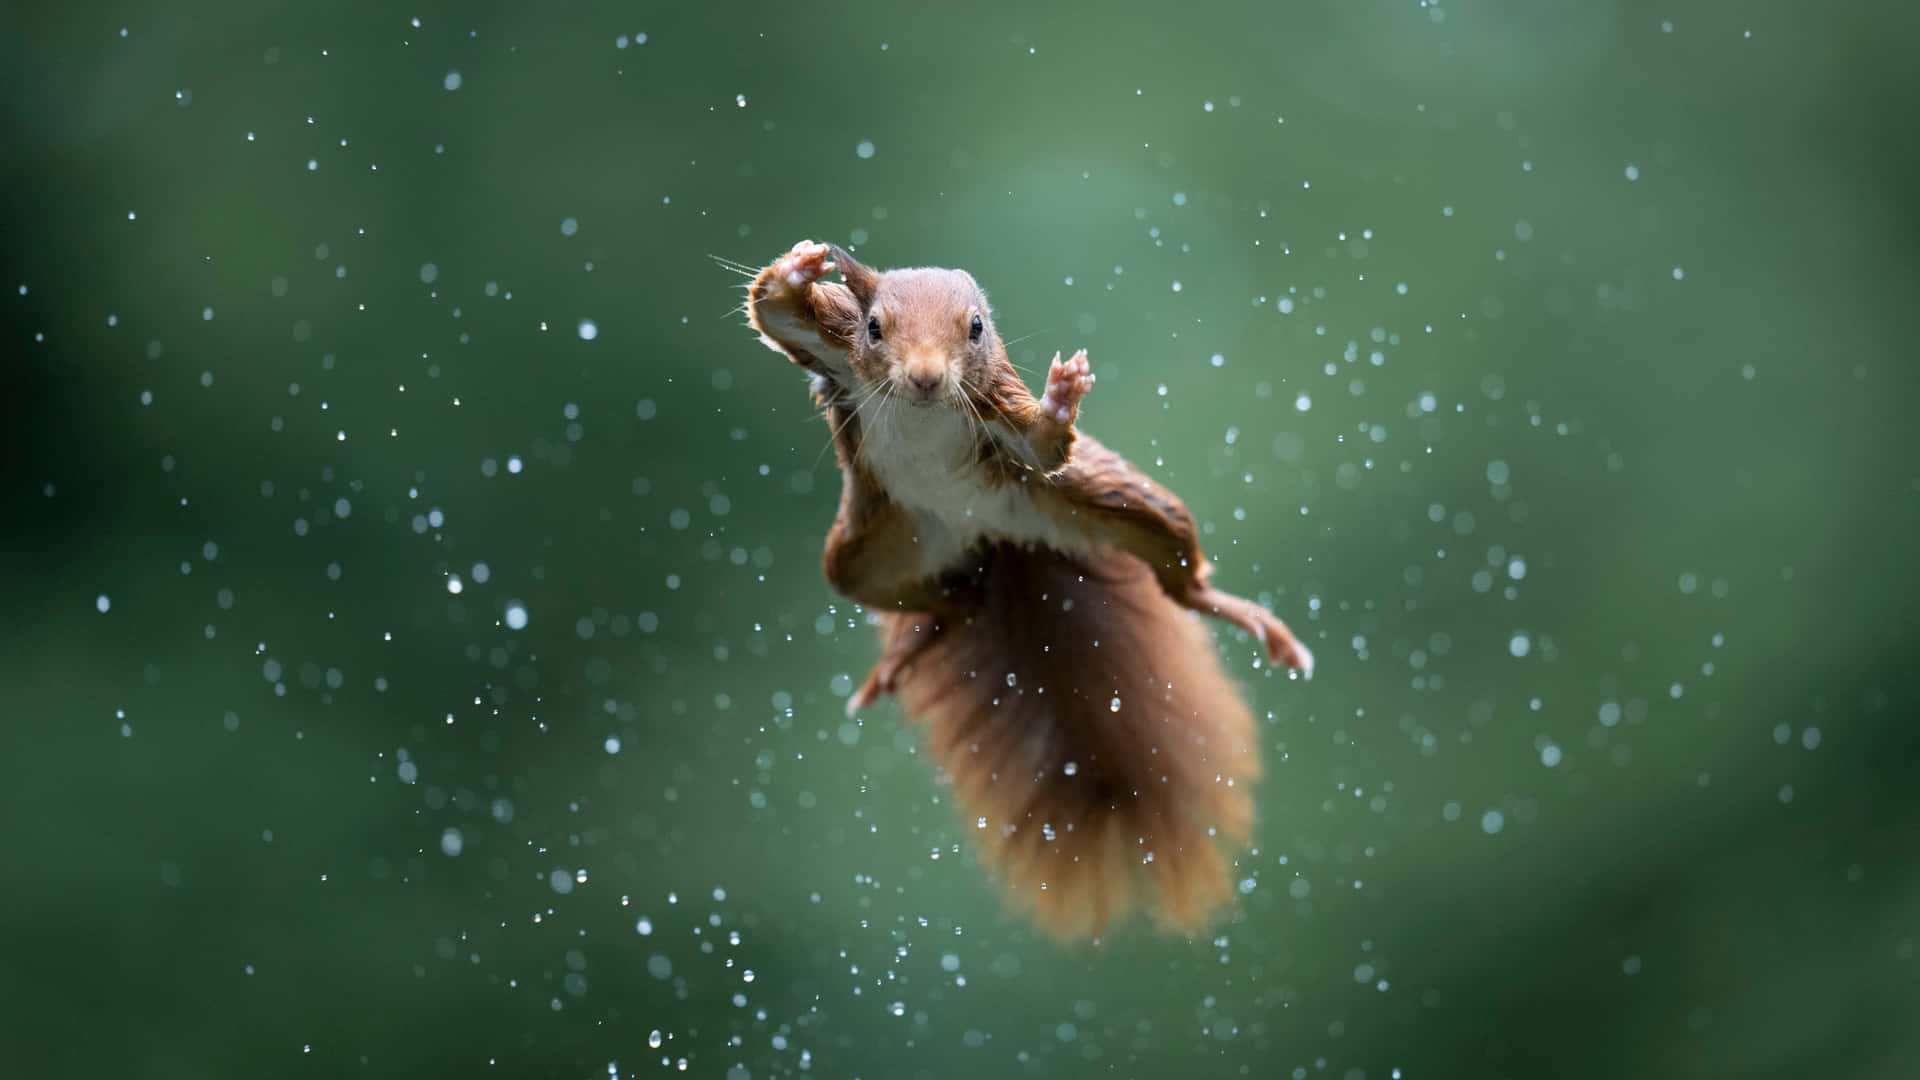 Funny Animal Jumping Squirrel In Air Pictures